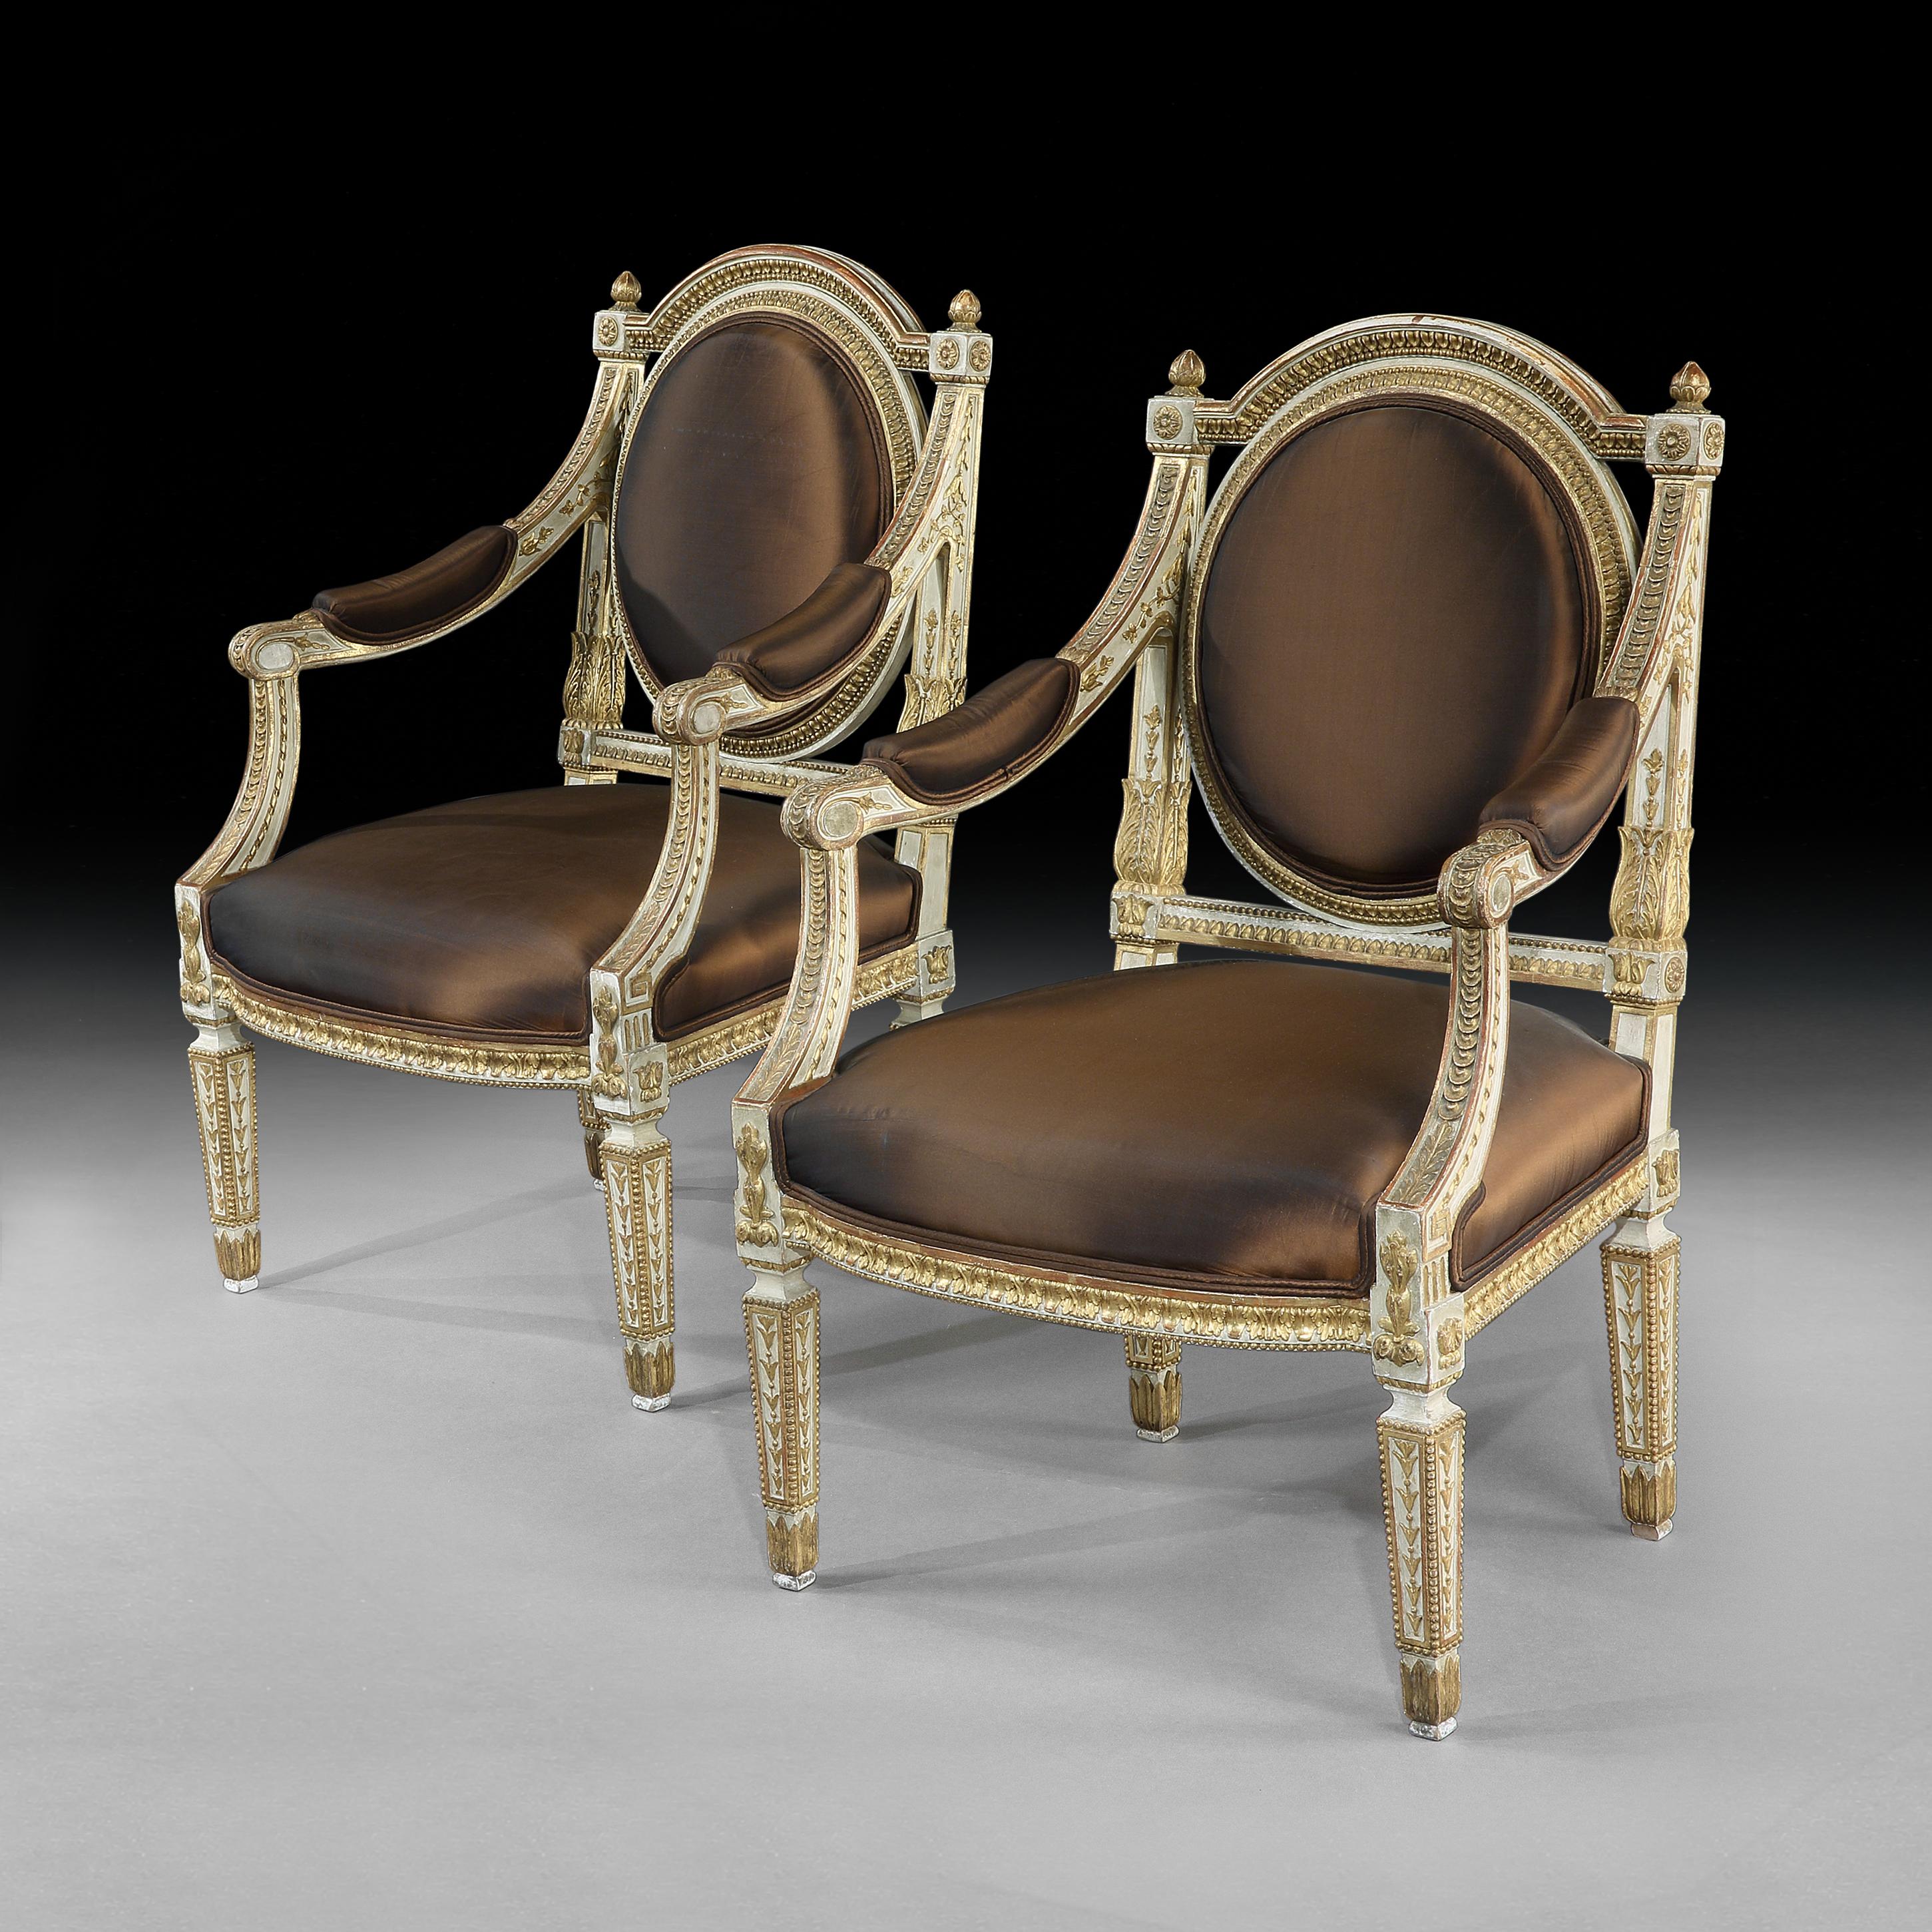 Neoclassical Revival Fine and Decorative Pair of Italian Painted and Parcel Gilt Armchairs of